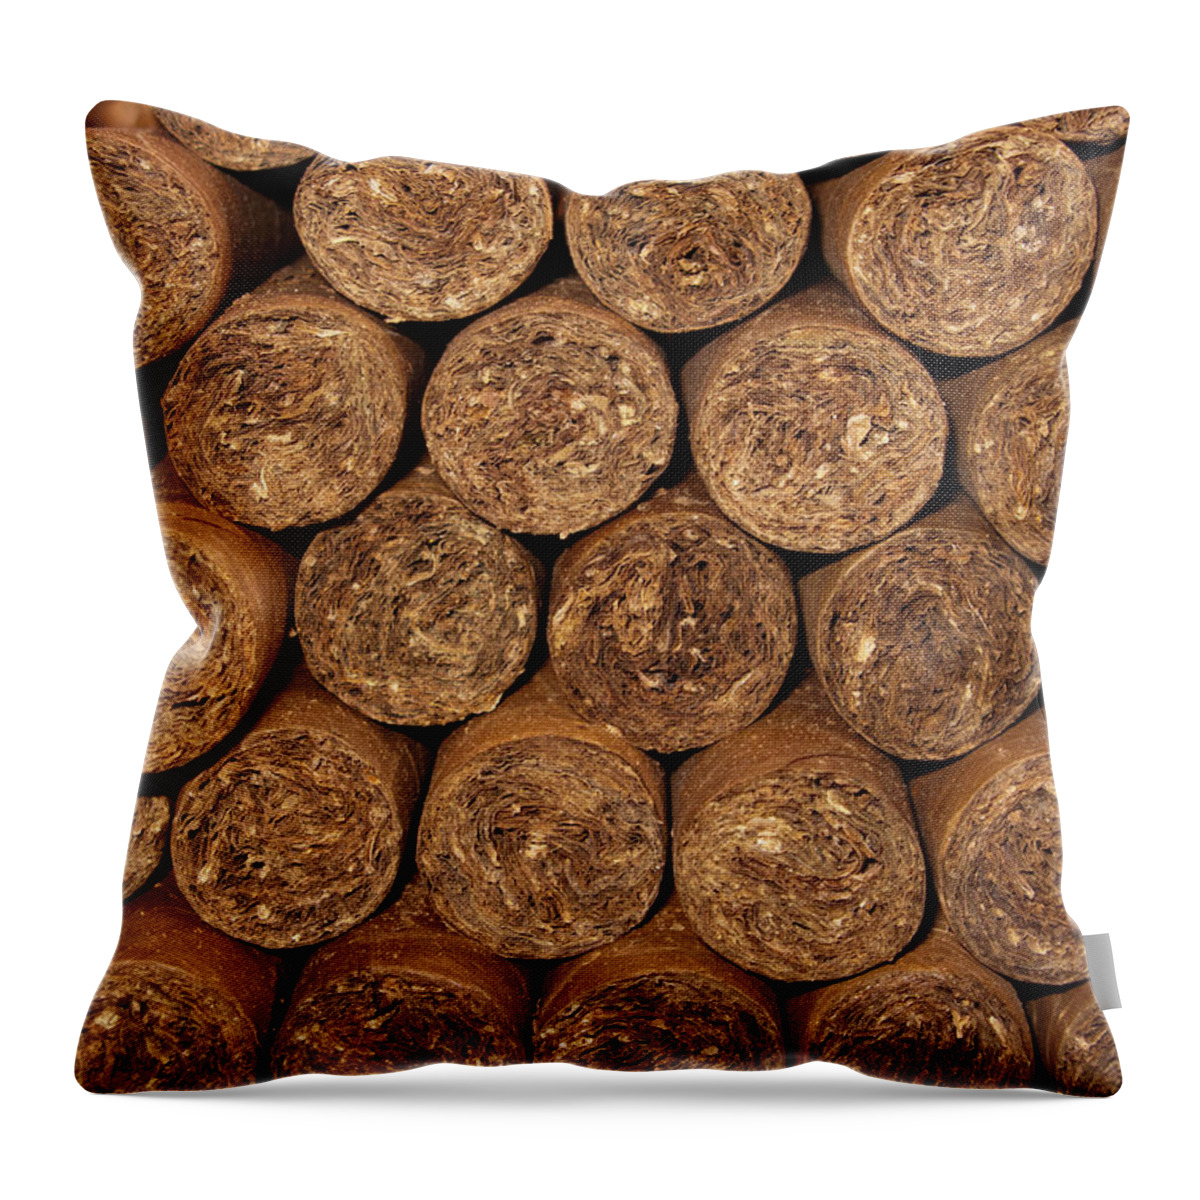 Cigars Throw Pillow featuring the photograph Cigars 262 by Michael Fryd